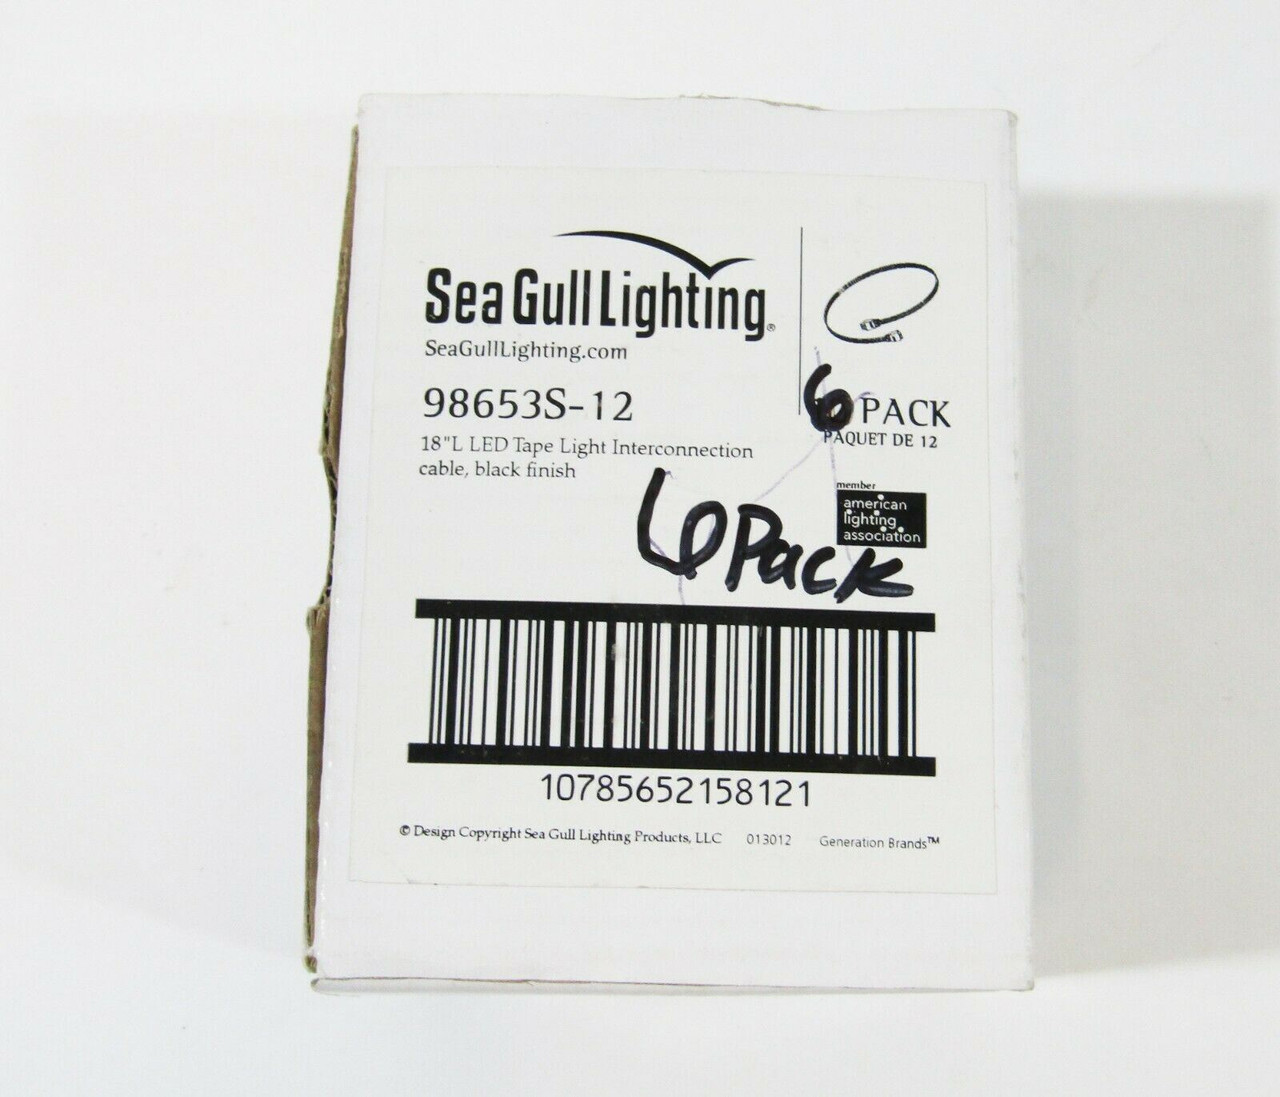 Details about   New Sea Gull Lighting 98653S-12 LED 18" Tape Light Interconnection Black 12 